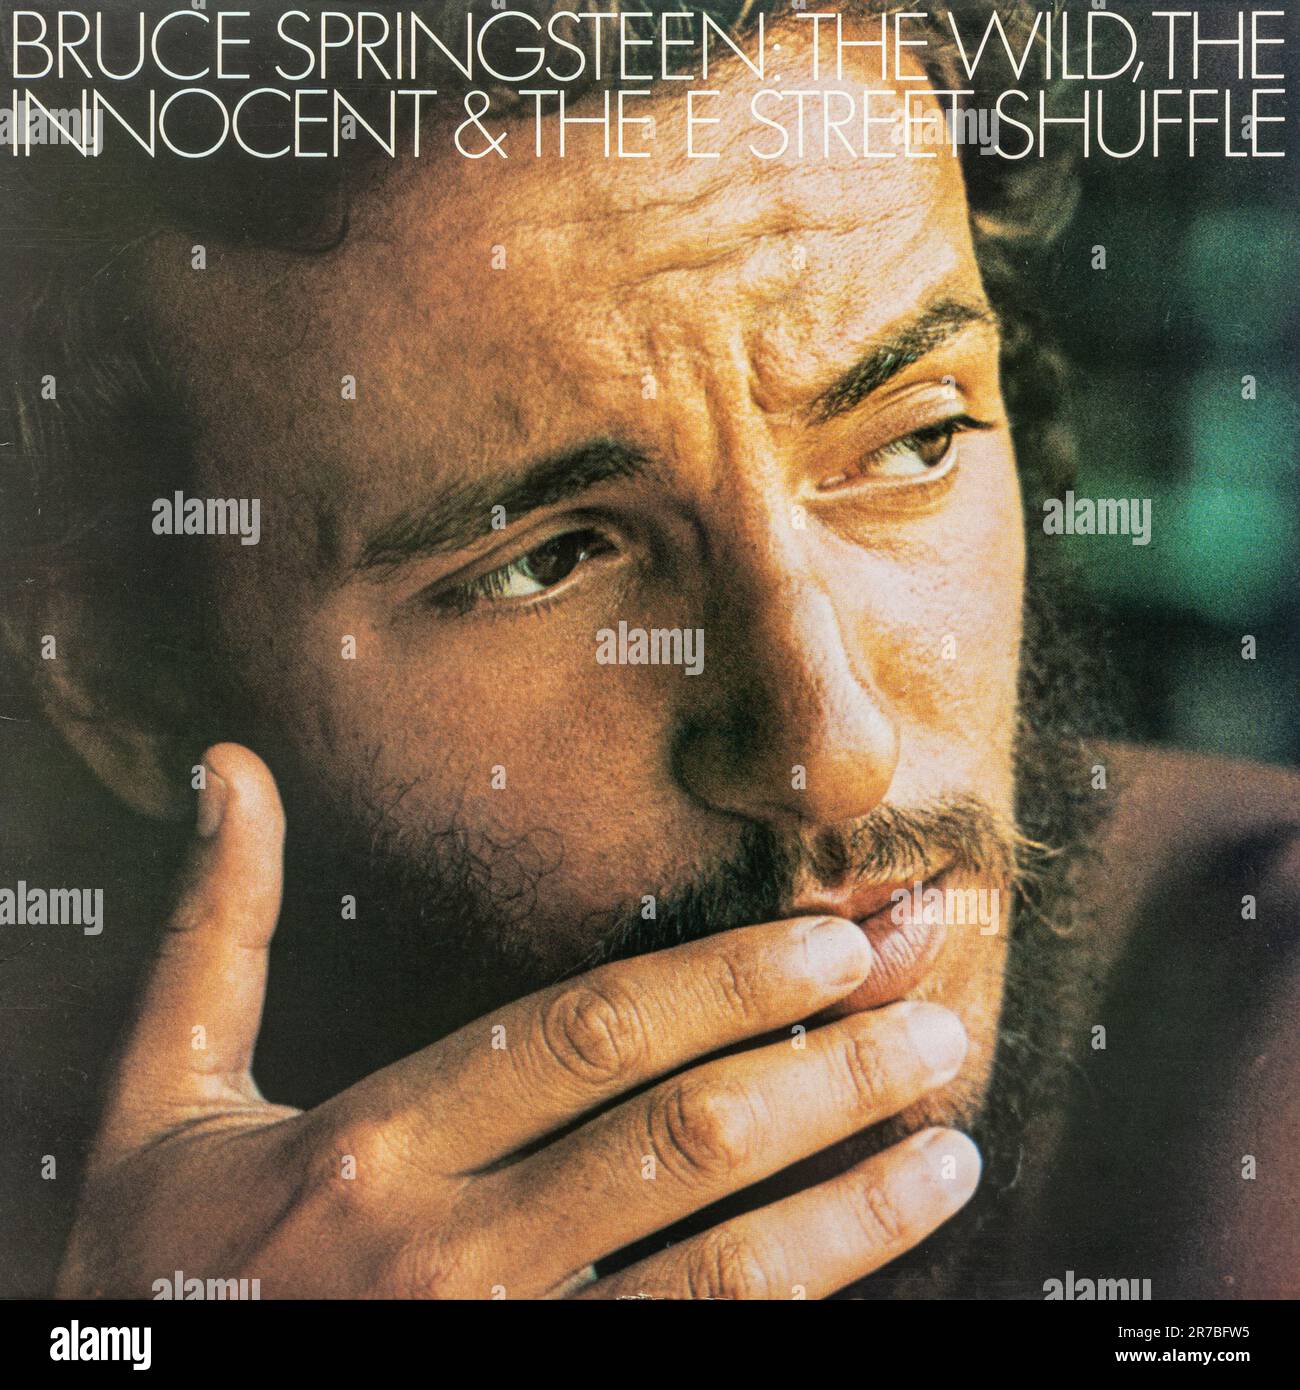 The Wild, the Innocent and the E Street Shuffle, album by Bruce Springsteen, vinyl record over Stock Photo